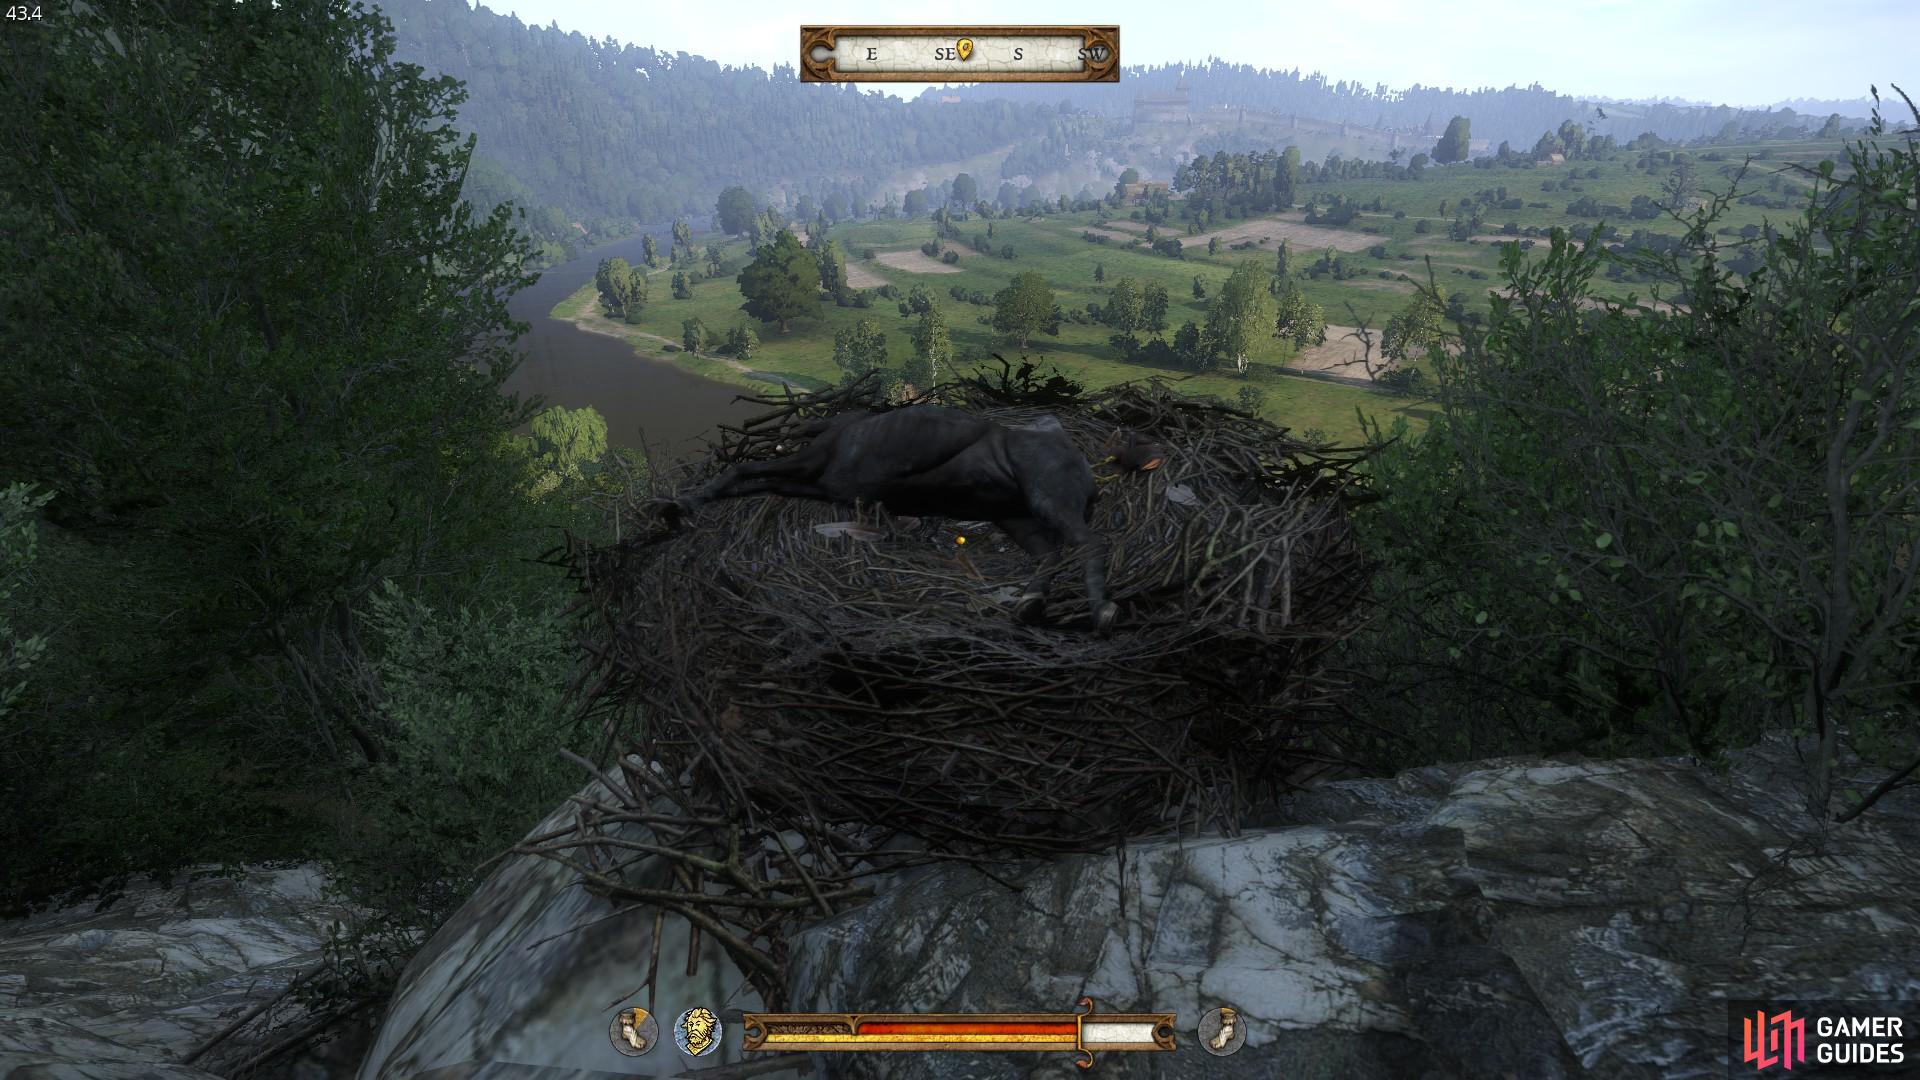 View from the location of the nest with the horse corpse within.